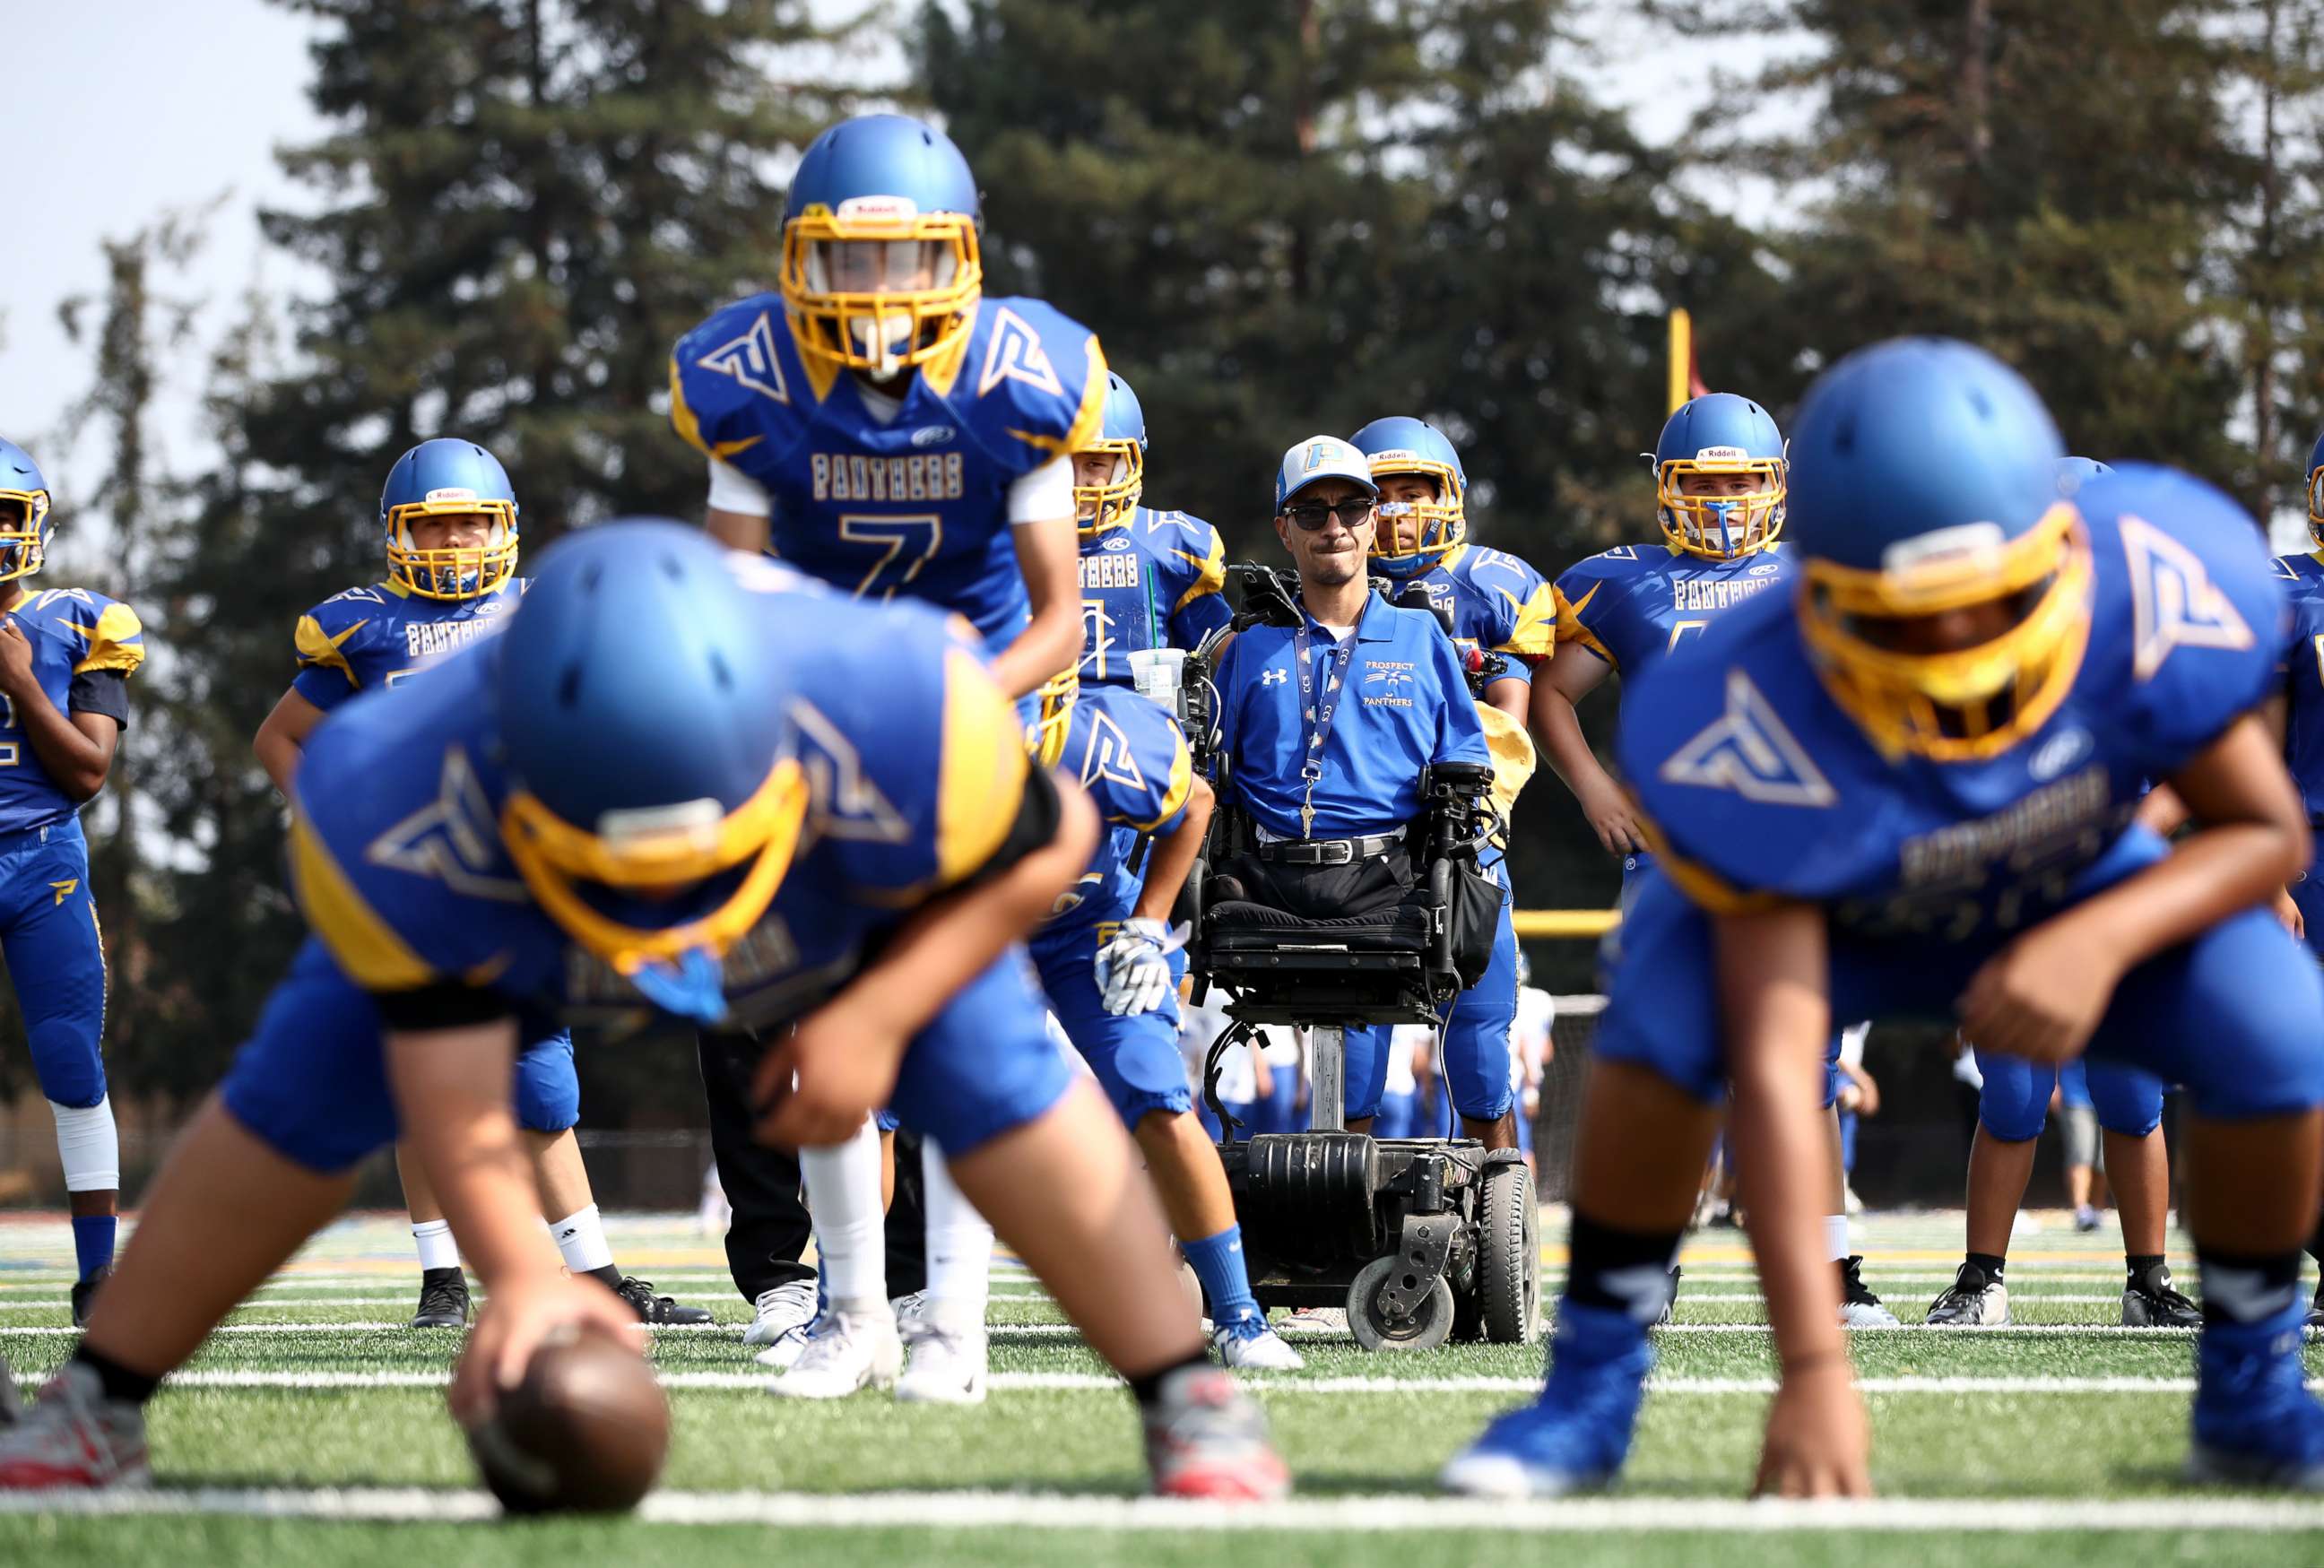 PHOTO: Rob Mendez, the head coach for the Prospect High School Junior Varsity football team, watches his team practice before their first game of the season against Santa Clara High School, Aug. 24, 2018, in Saratoga, Calif.